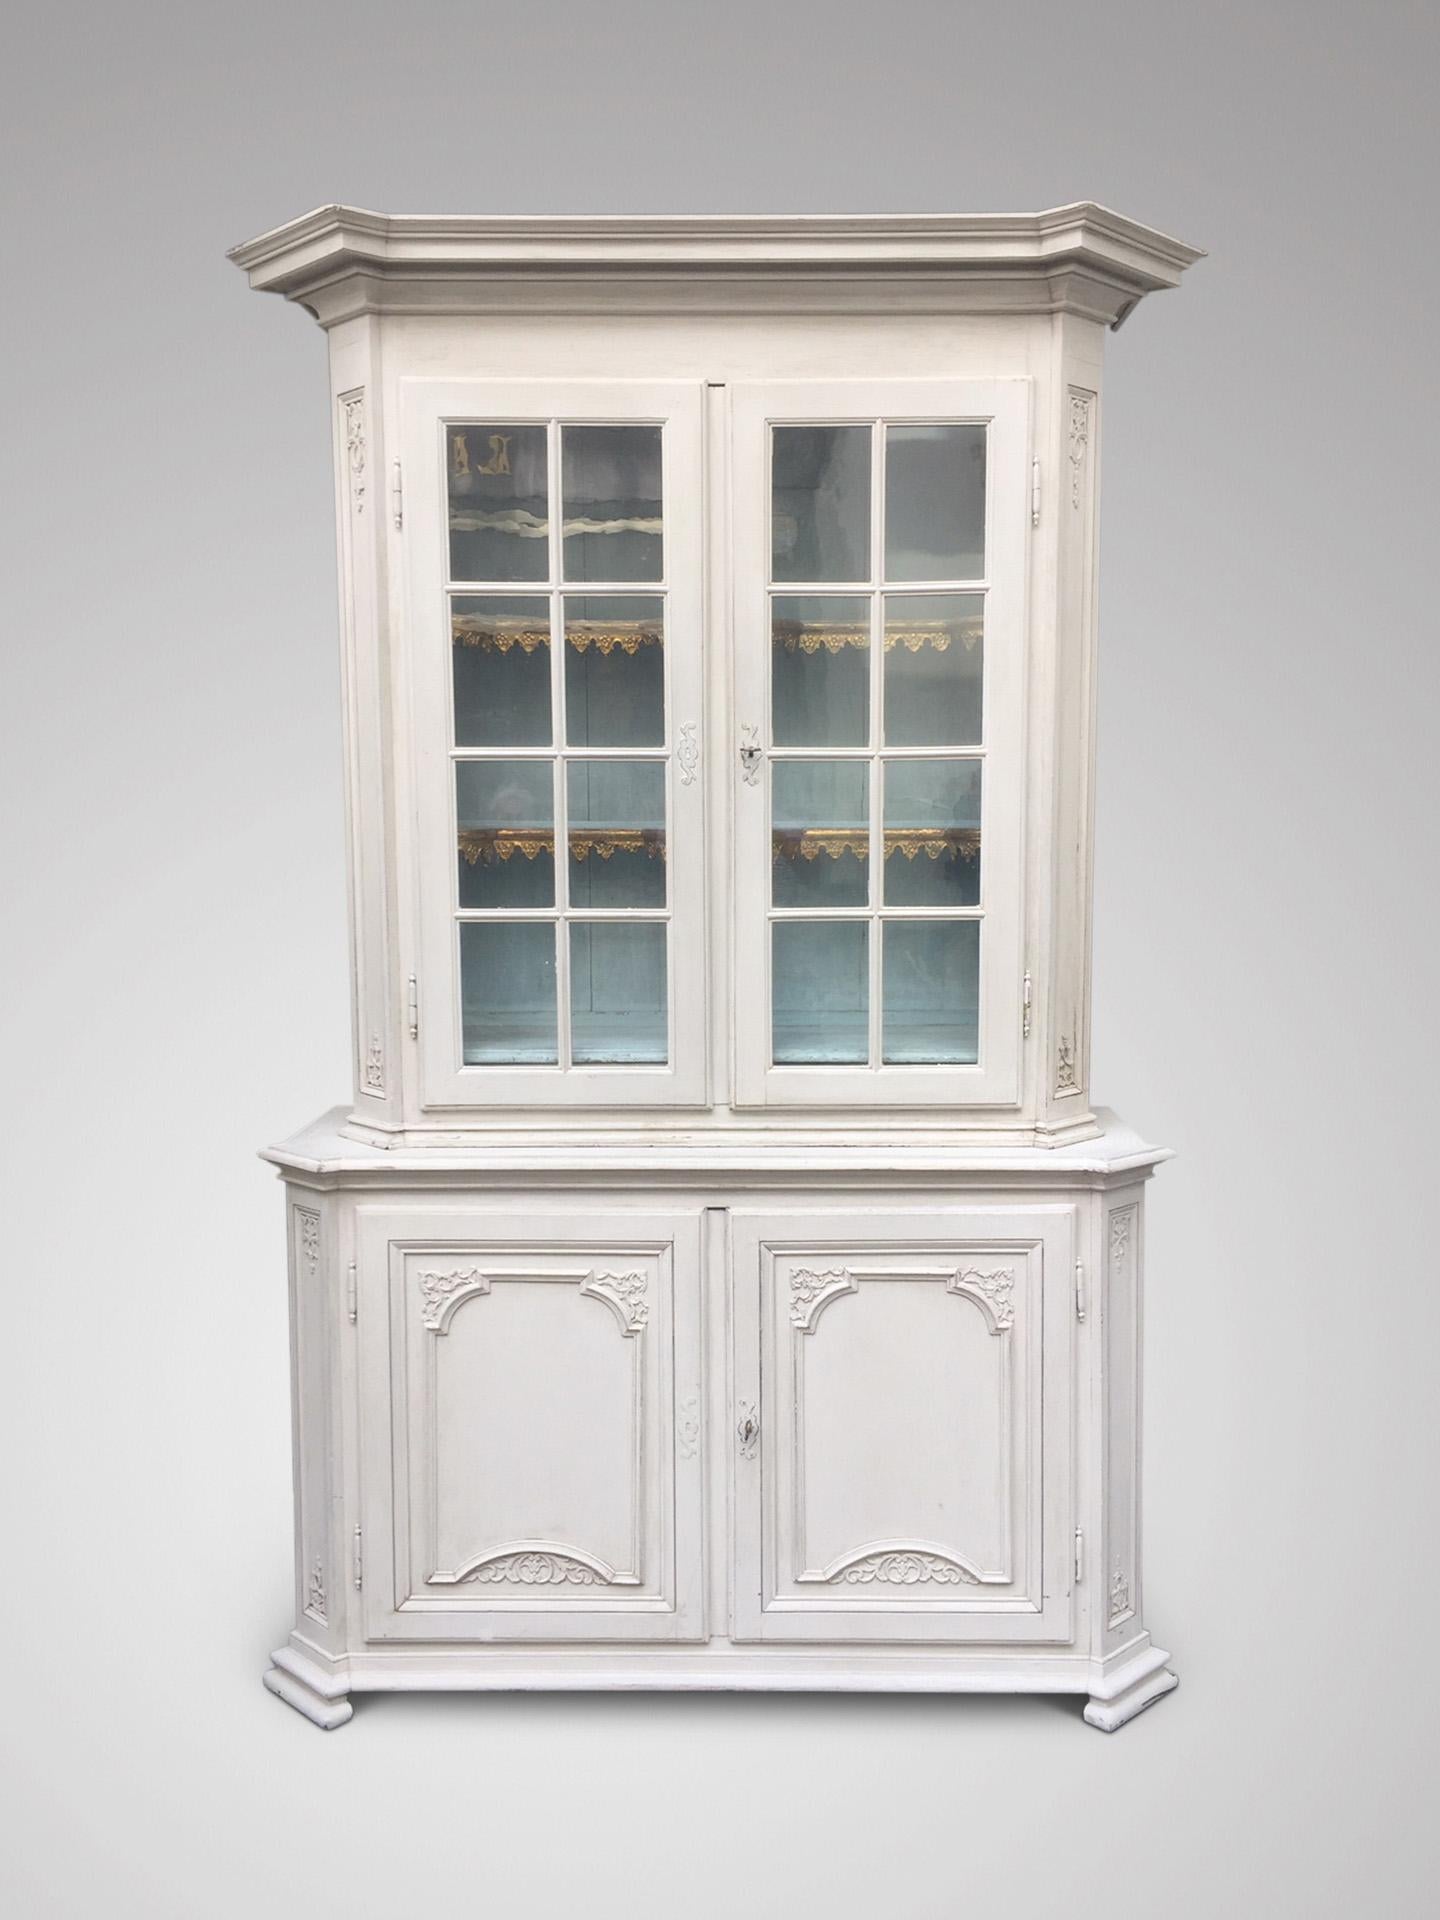 A mid-18th century, Belgian from the Liège town, white painted oak display cabinet. Carved overall with C-scrolled rock-work and flower baskets, the eared moulded breakfront cornice above a pair of original glazed doors enclosing a light blue